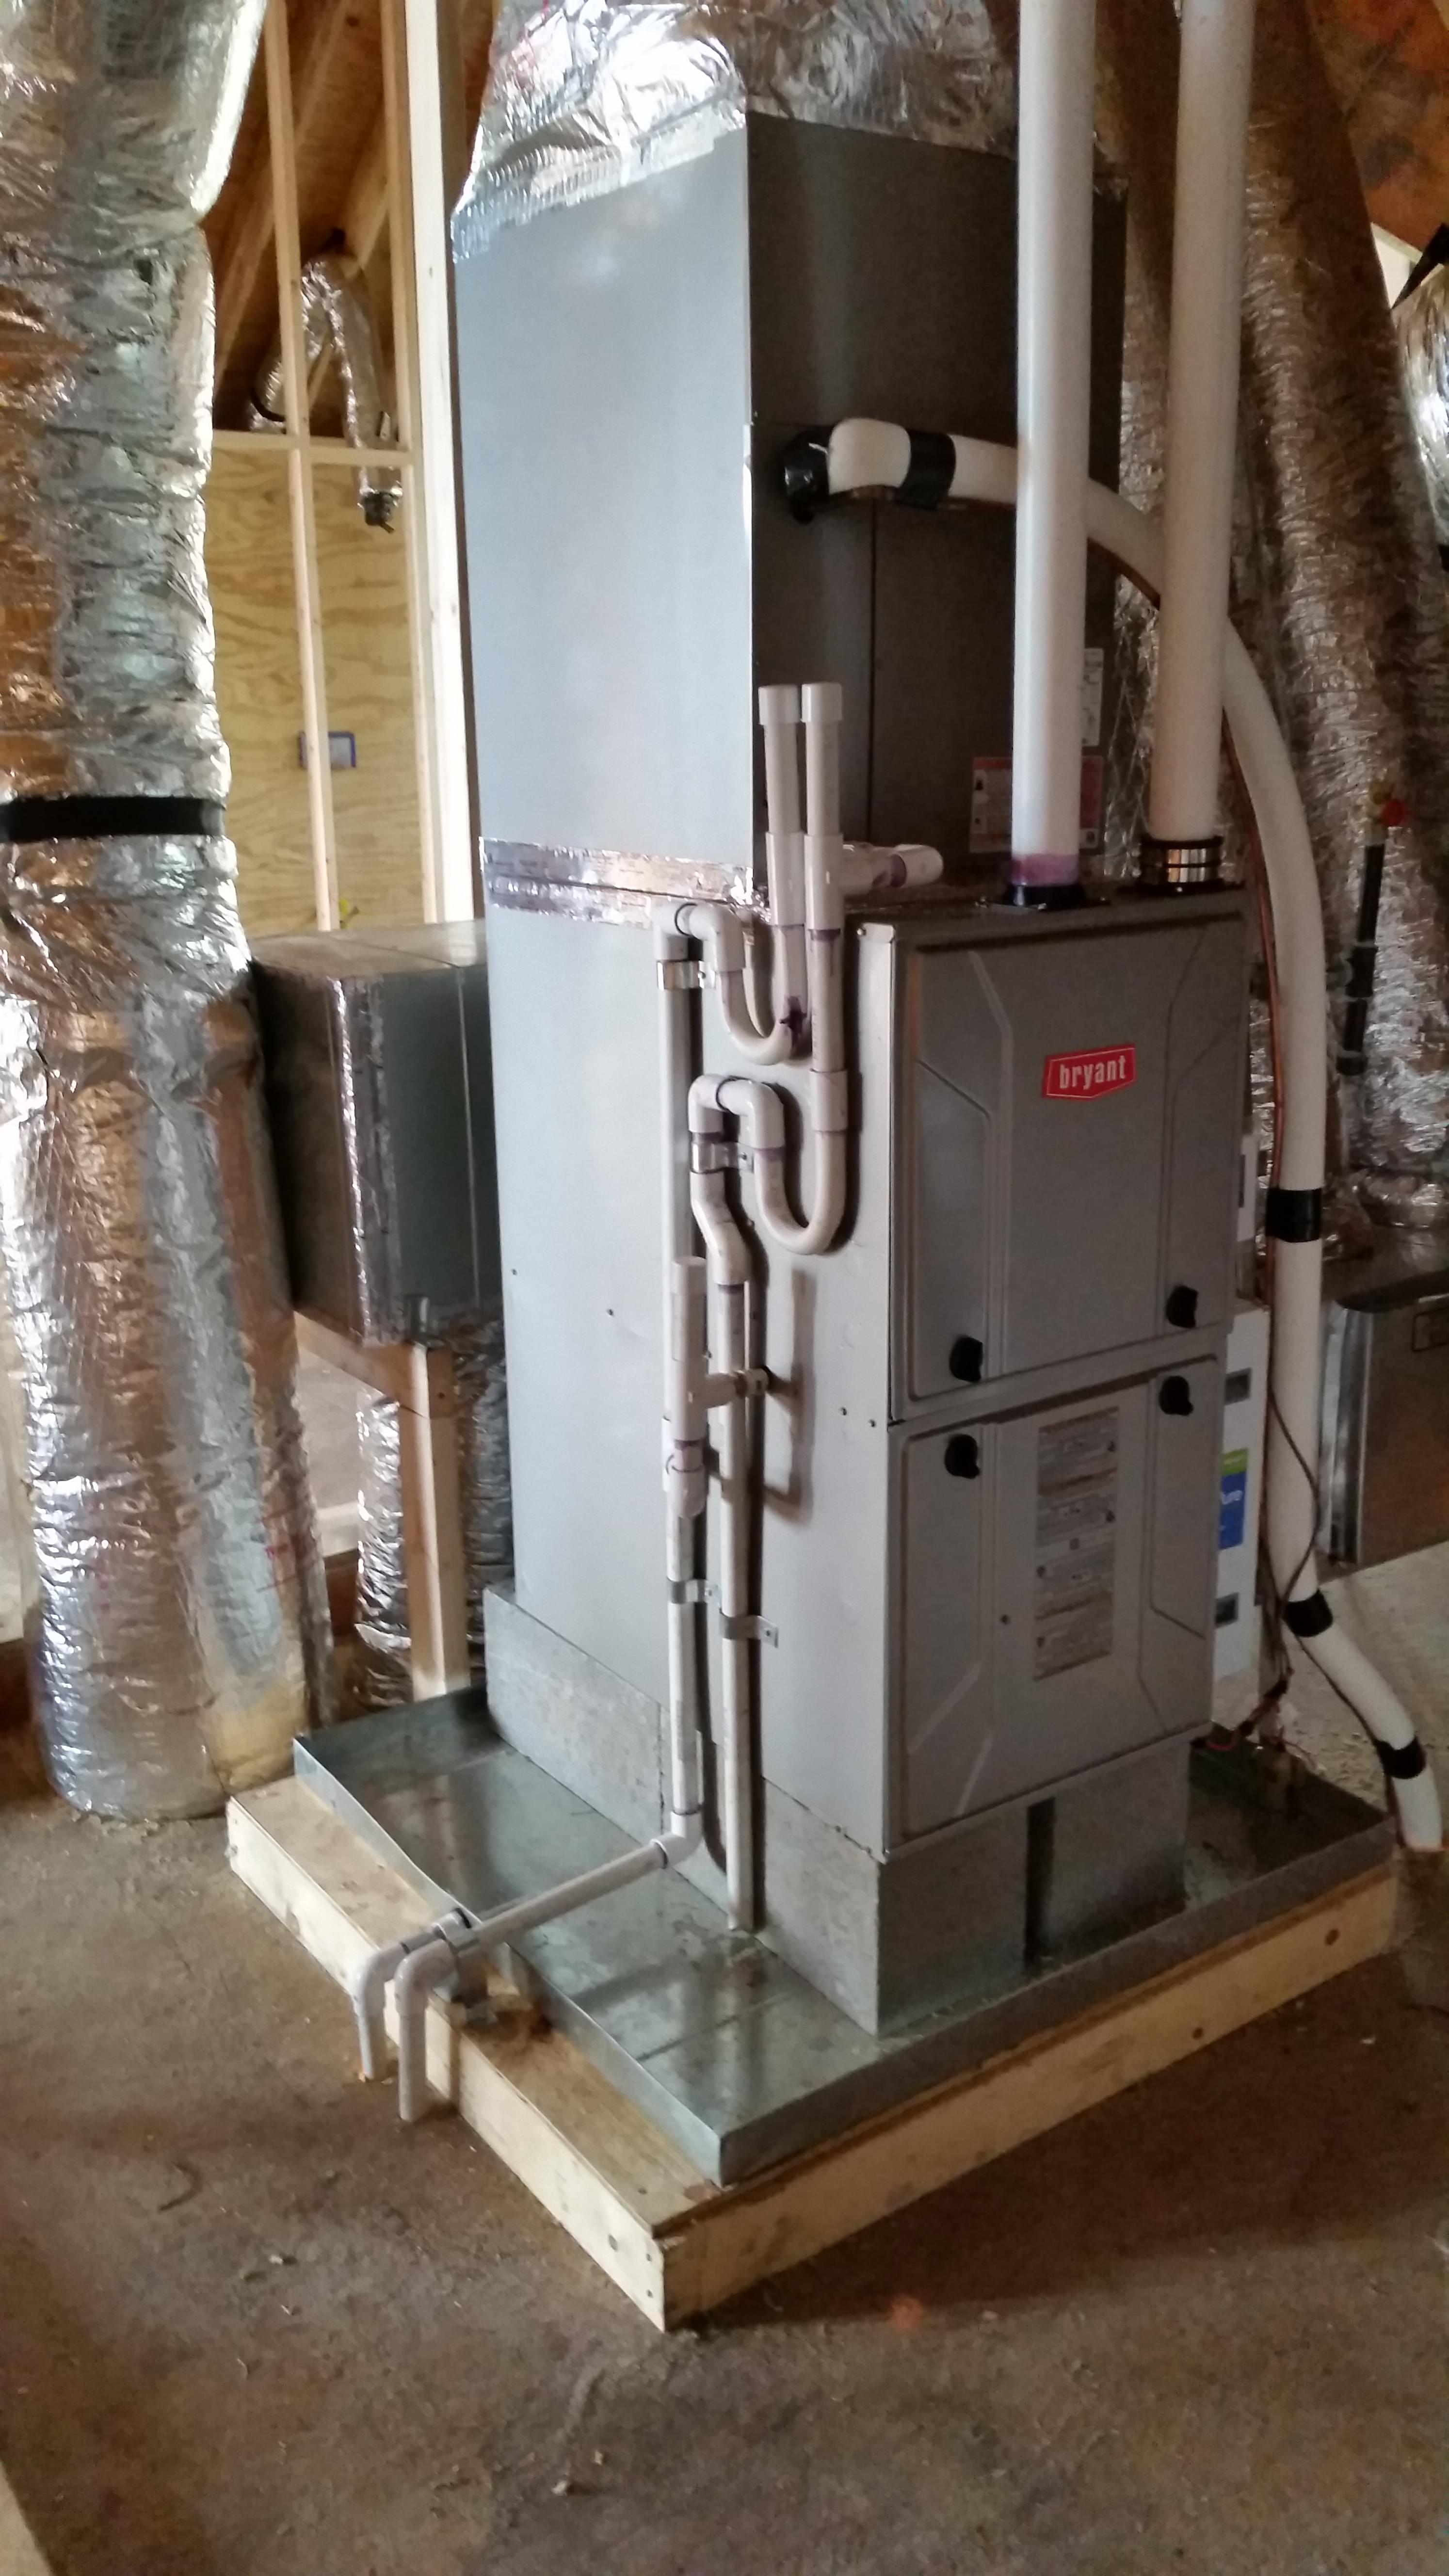 looking-to-install-a-new-furnace-here-s-what-you-should-consider-in-a